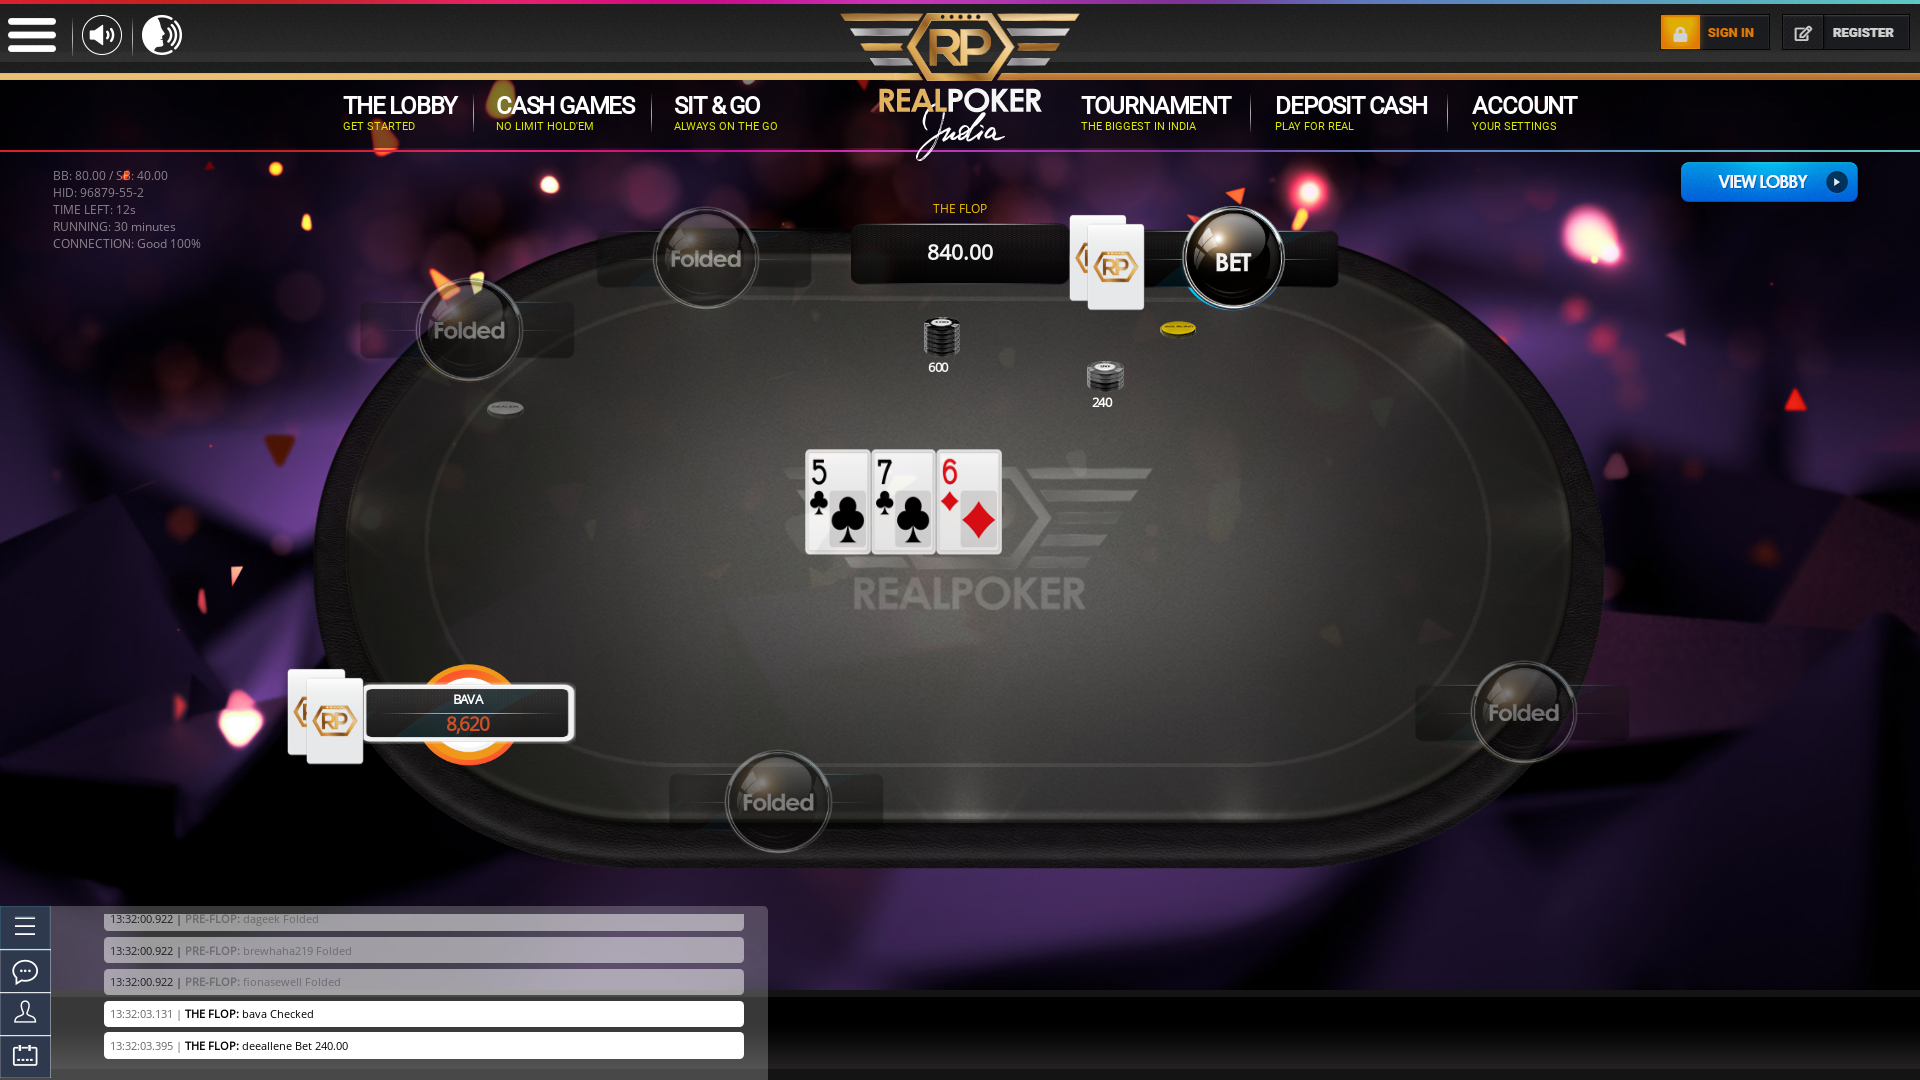 Online poker on a 10 player table in the 30th minute match up